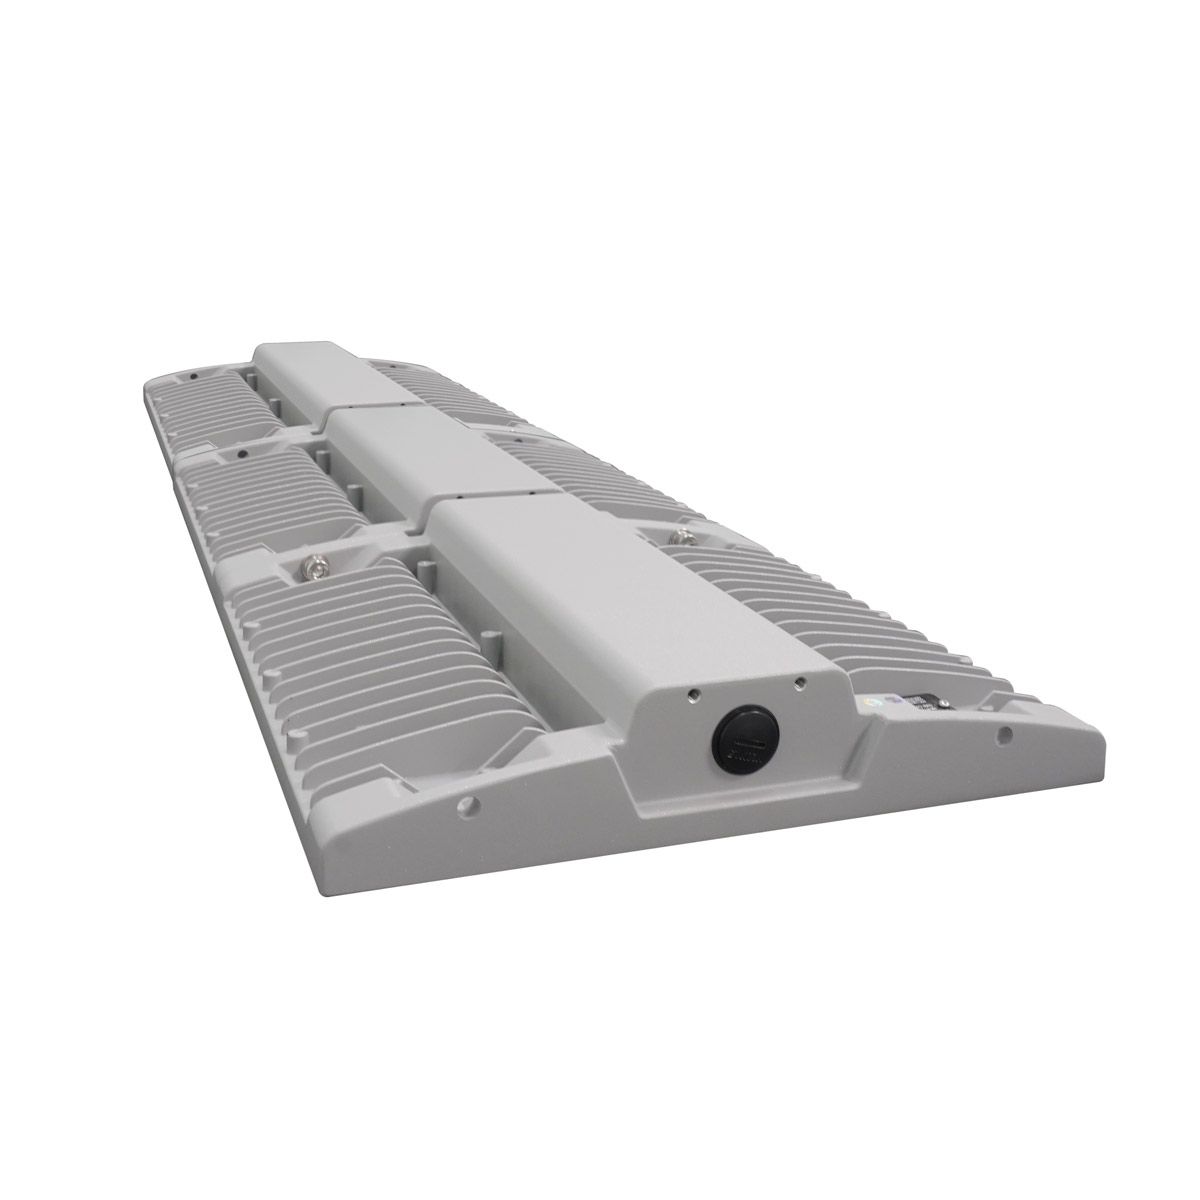 LUX Linear LED High Bay